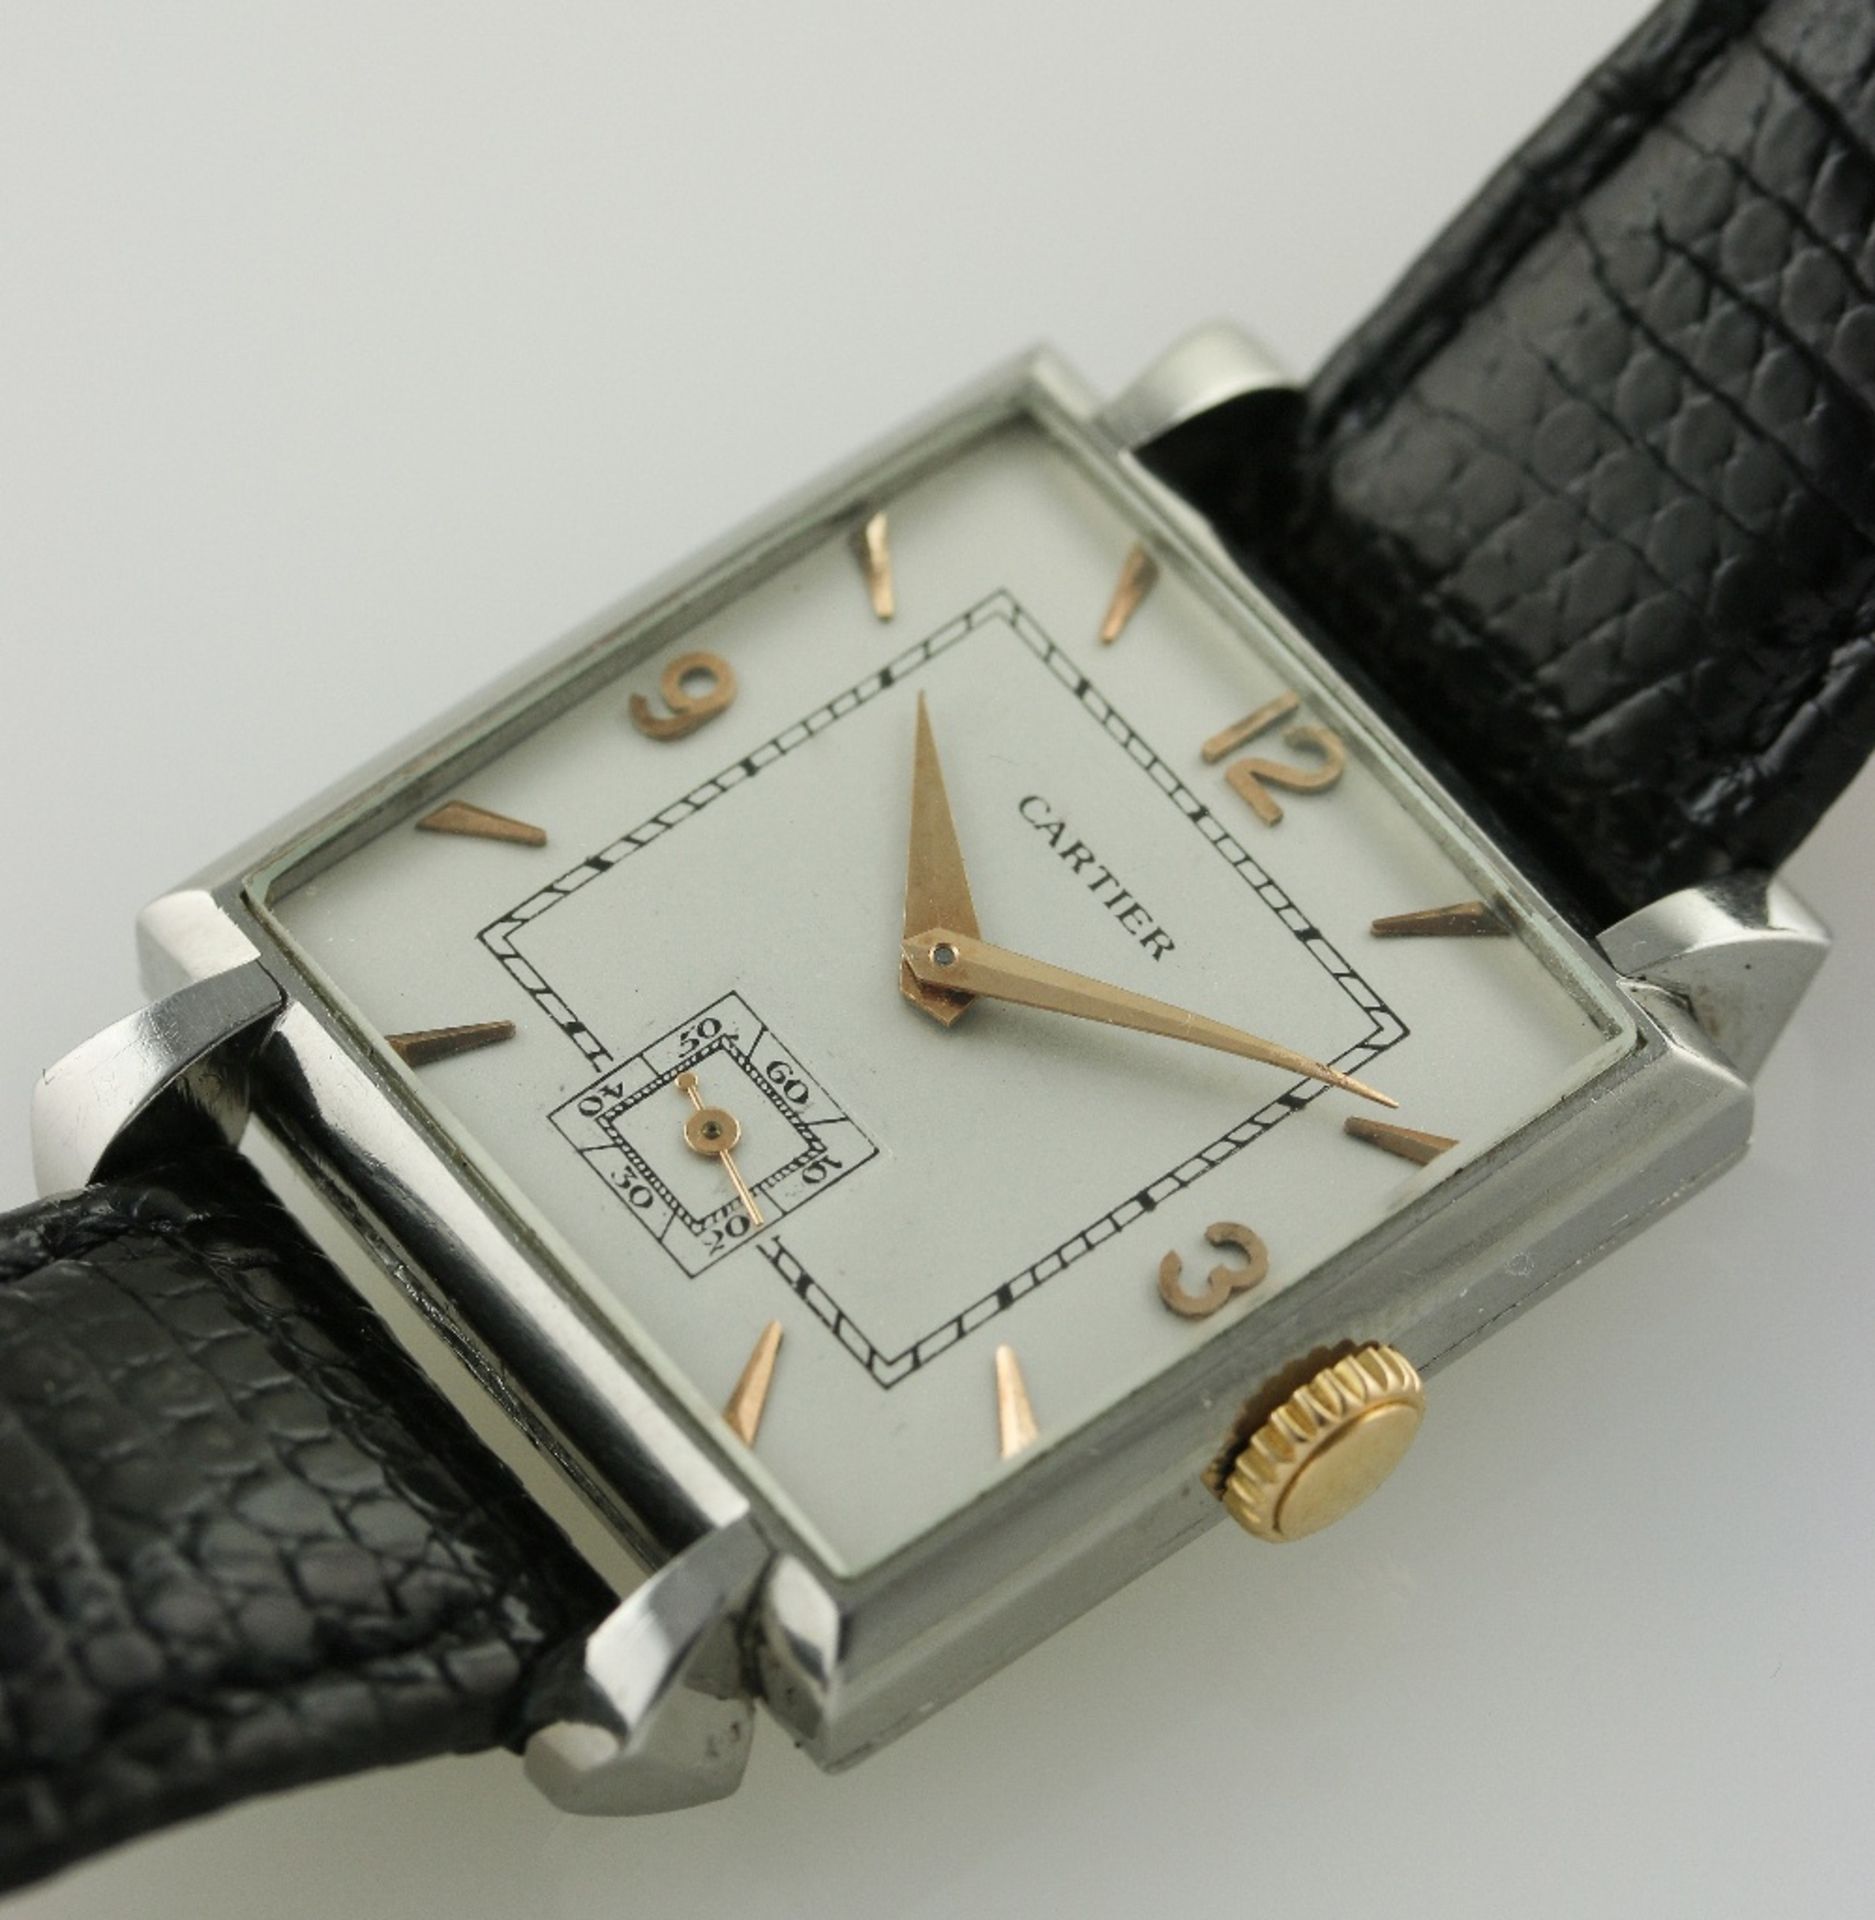 A GENTLEMAN'S STAINLESS STEEL CARTIER WRIST WATCH CIRCA 1950, MADE BY JAEGER-LECOULTRE D: Silver - Image 3 of 8